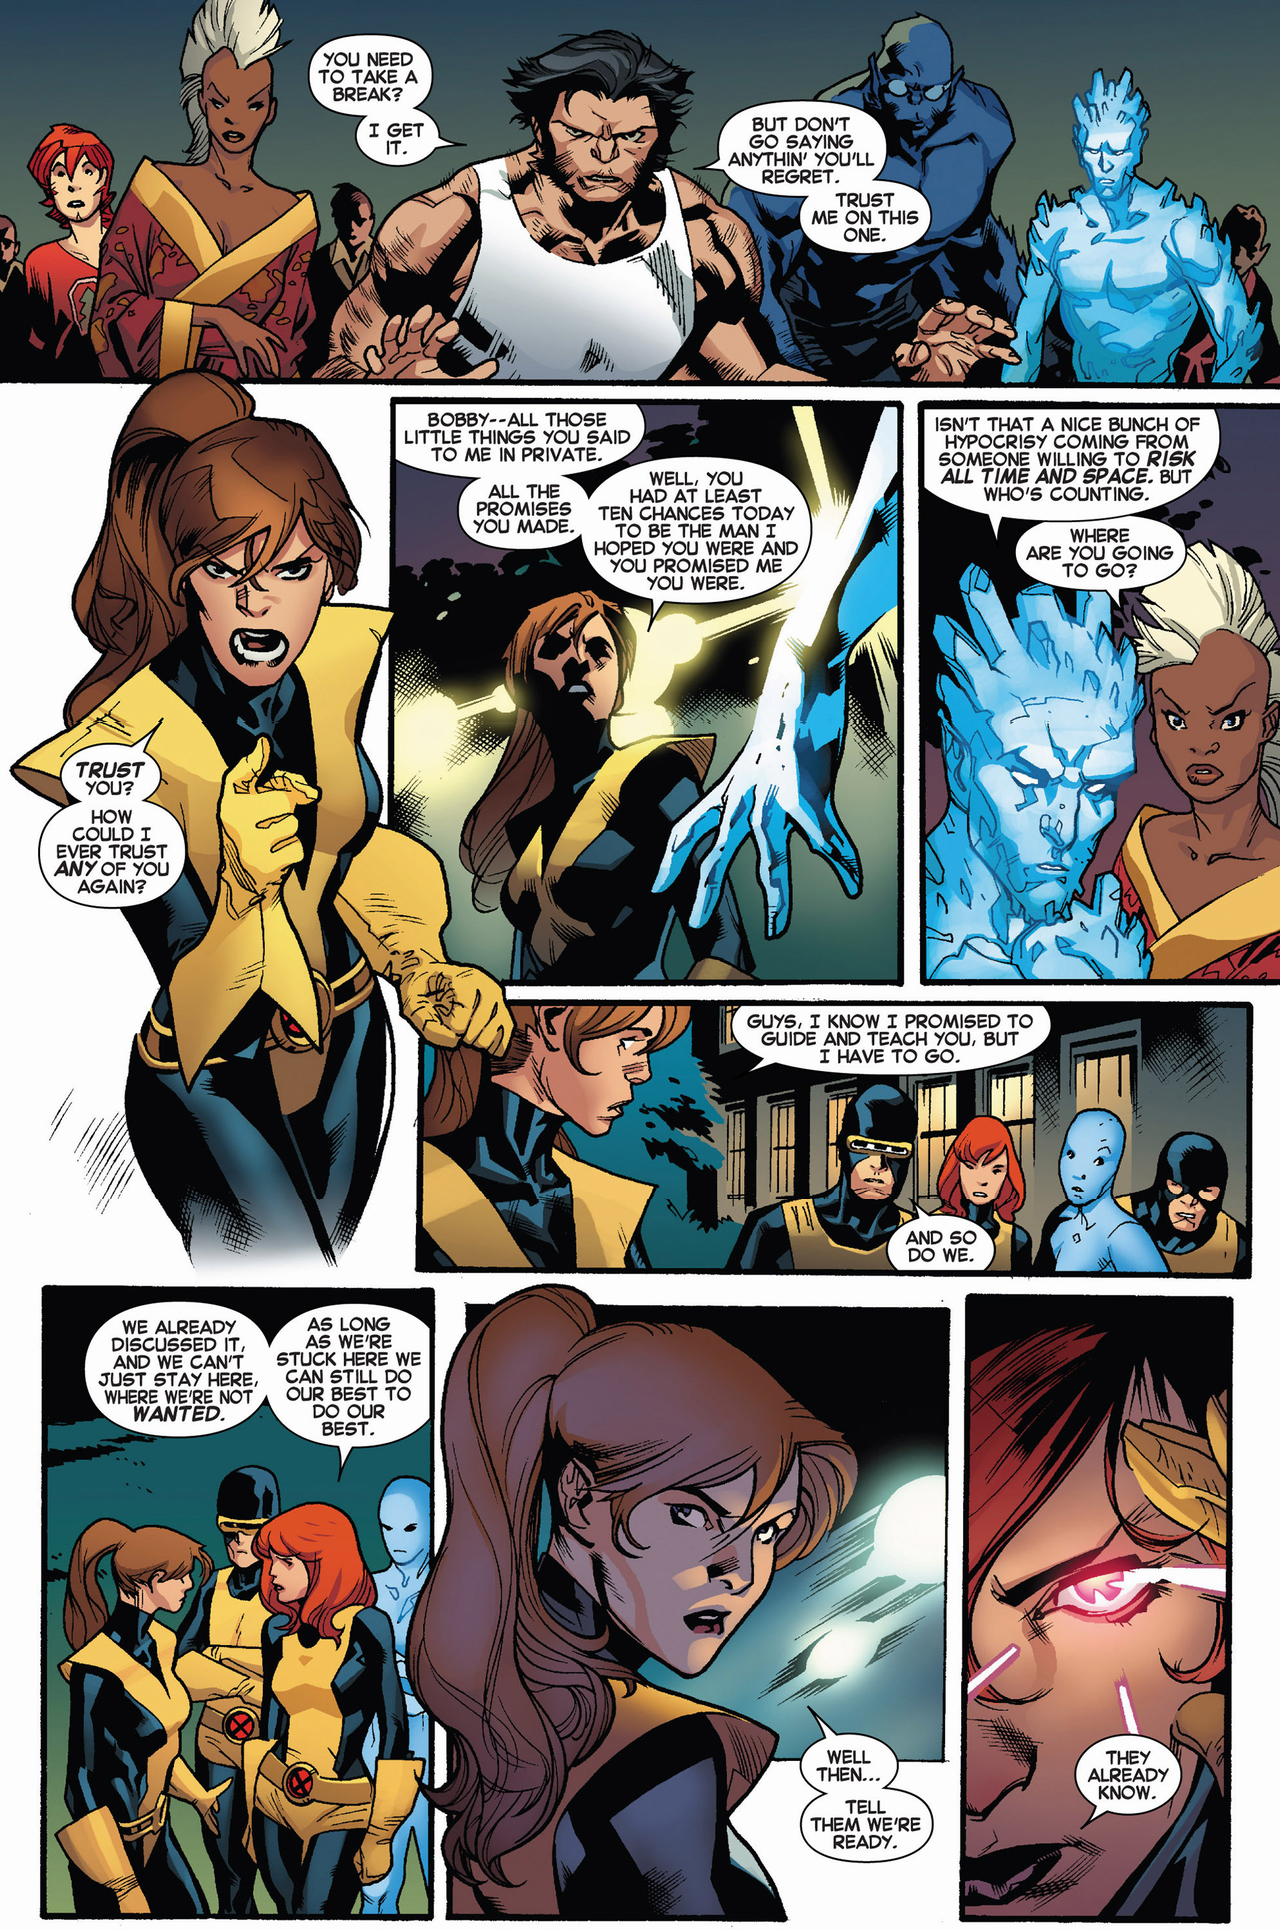 kitty pryde and the original 5 x-men joins cyclops's team